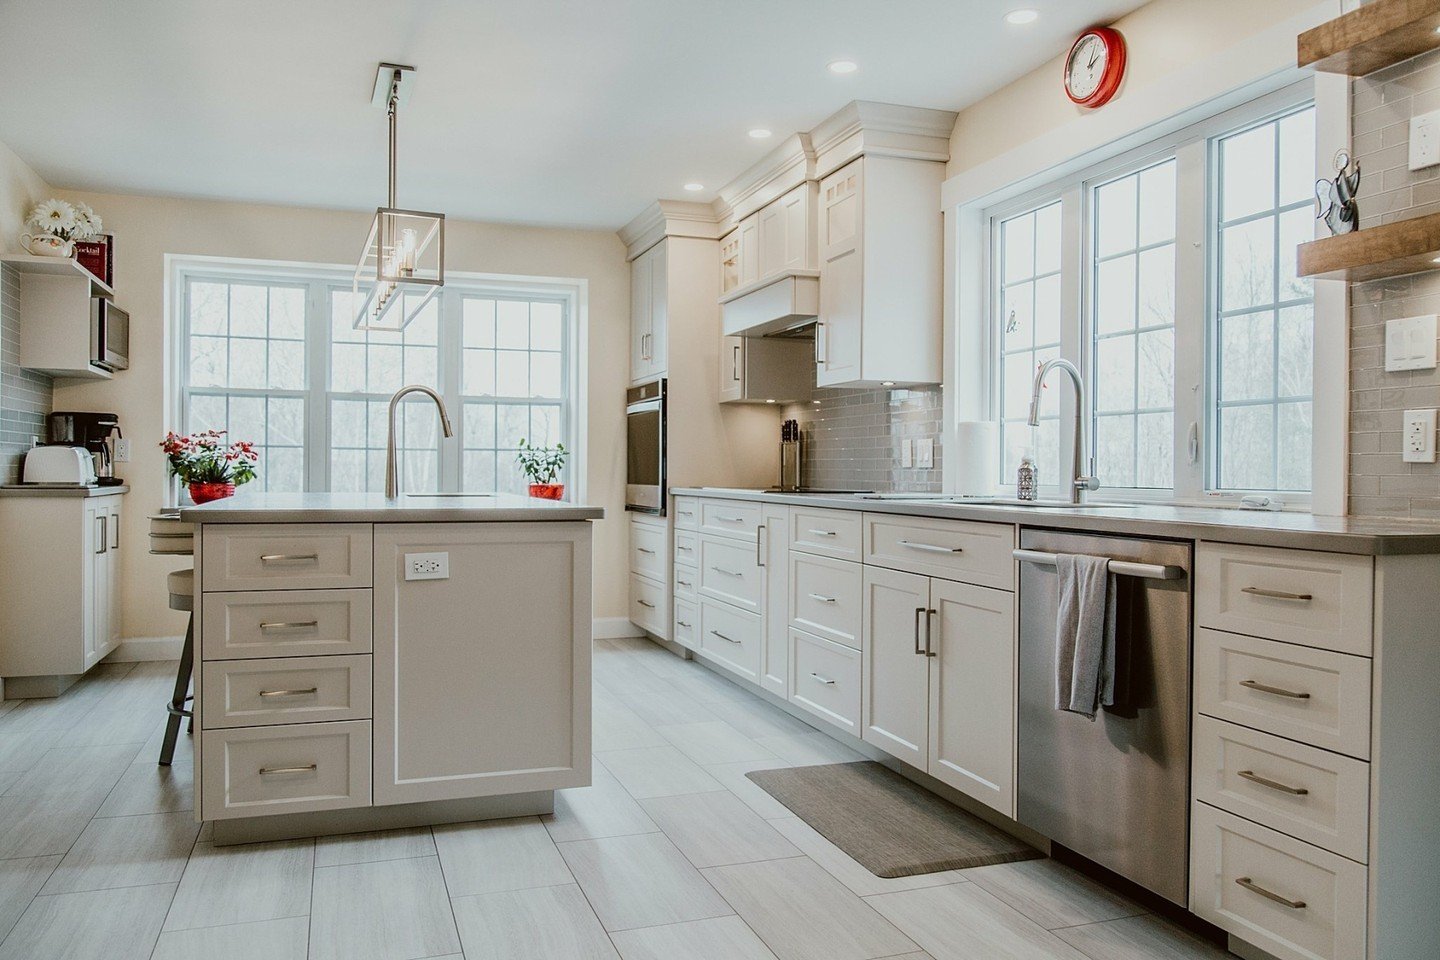 Is your kitchen the heart of your home?

Designed by @avondalekitchens 

#hometeamrenovations #homeliferenovations #renovationshome #homeofrenovations #homeagainrenovations #homerenovationspecialist #oldhomerenovations #mobilehomerenovations #newhome